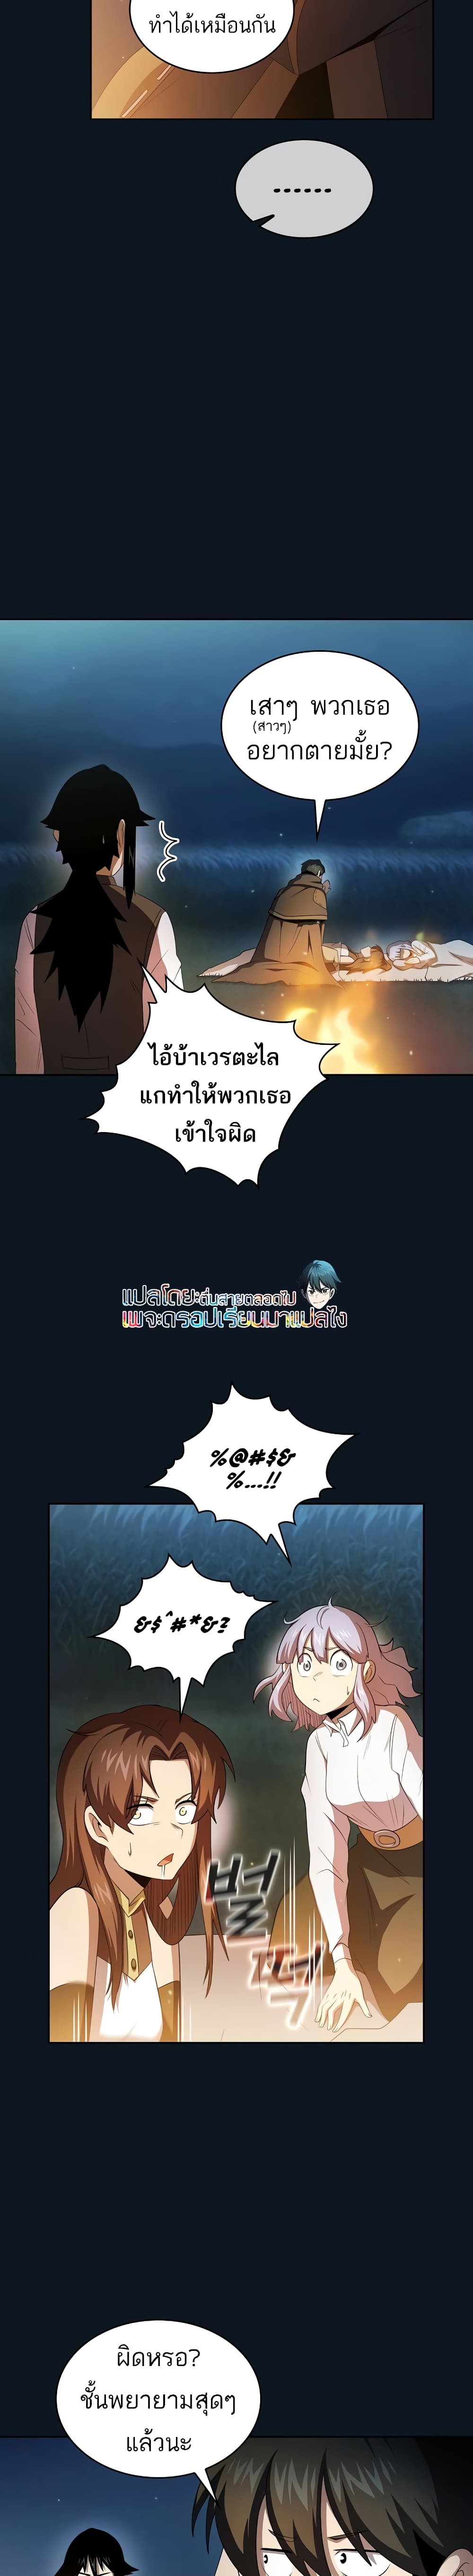 Is This Hero for Real à¸à¸­à¸à¸à¸µà¹ 33 (21)